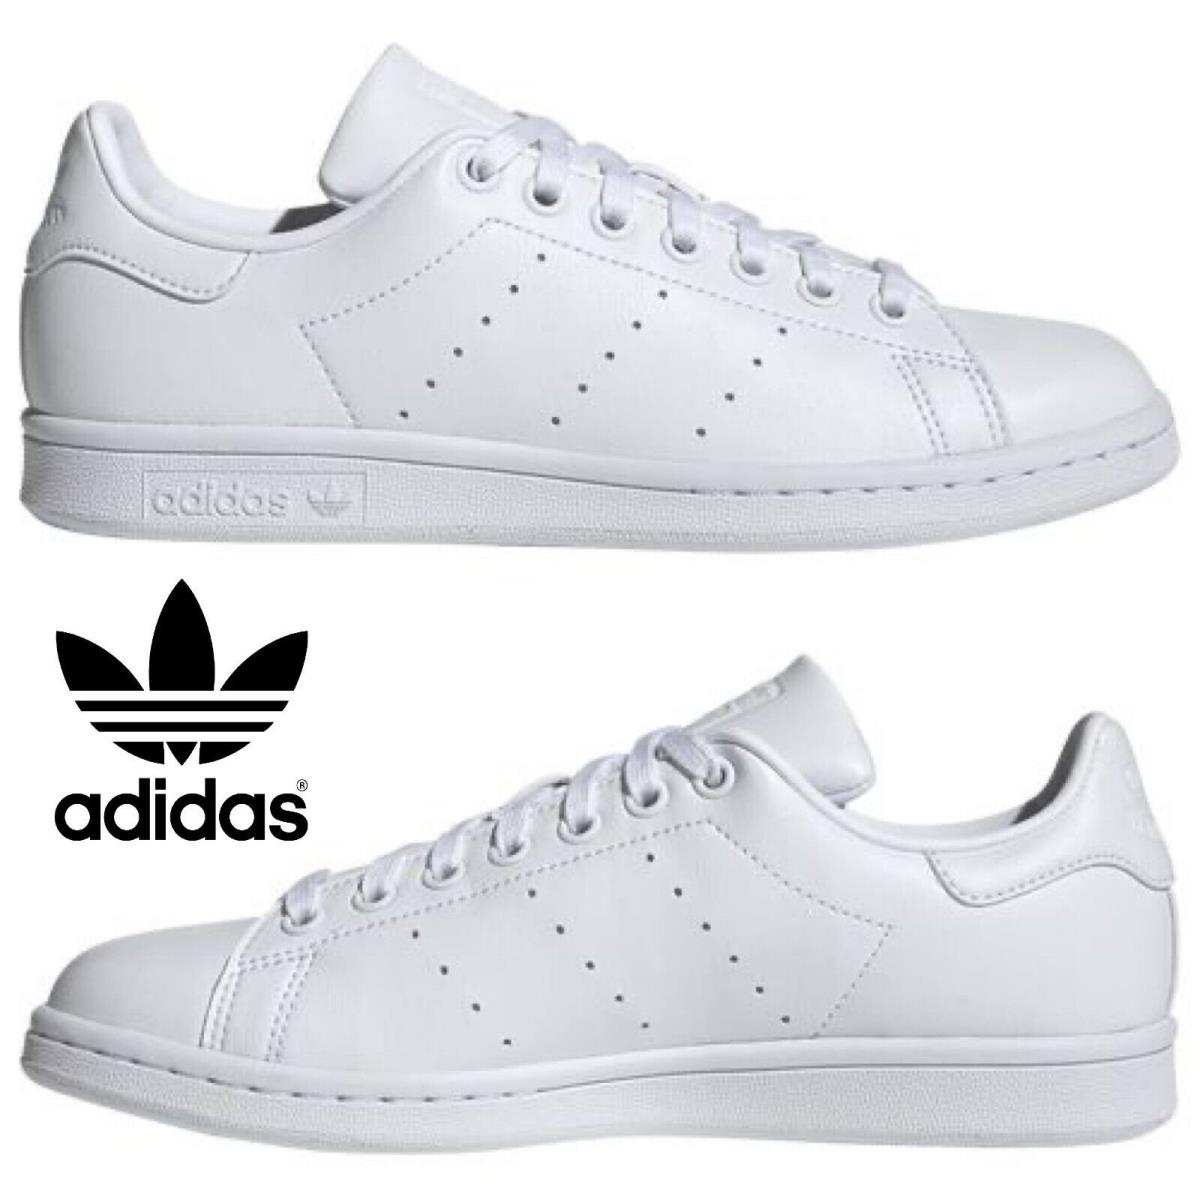 Adidas Originals Stan Smith Women s Sneakers Casual Shoes Sport Gym White